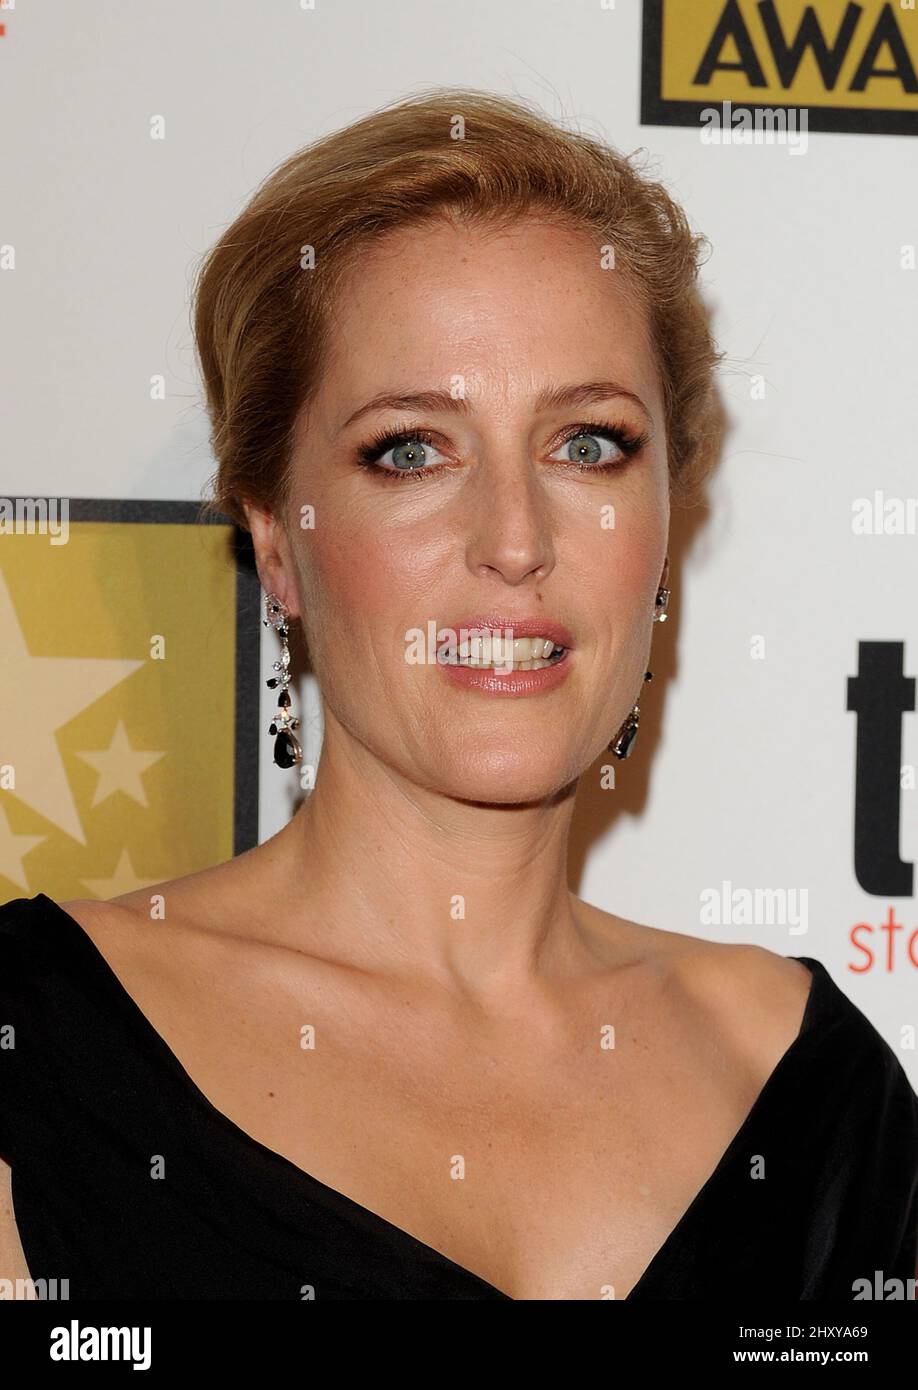 Gillian Anderson attending the 2012 Critics' Choice Awards held at the Beverly Hilton in Los Angeles, USA. Stock Photo